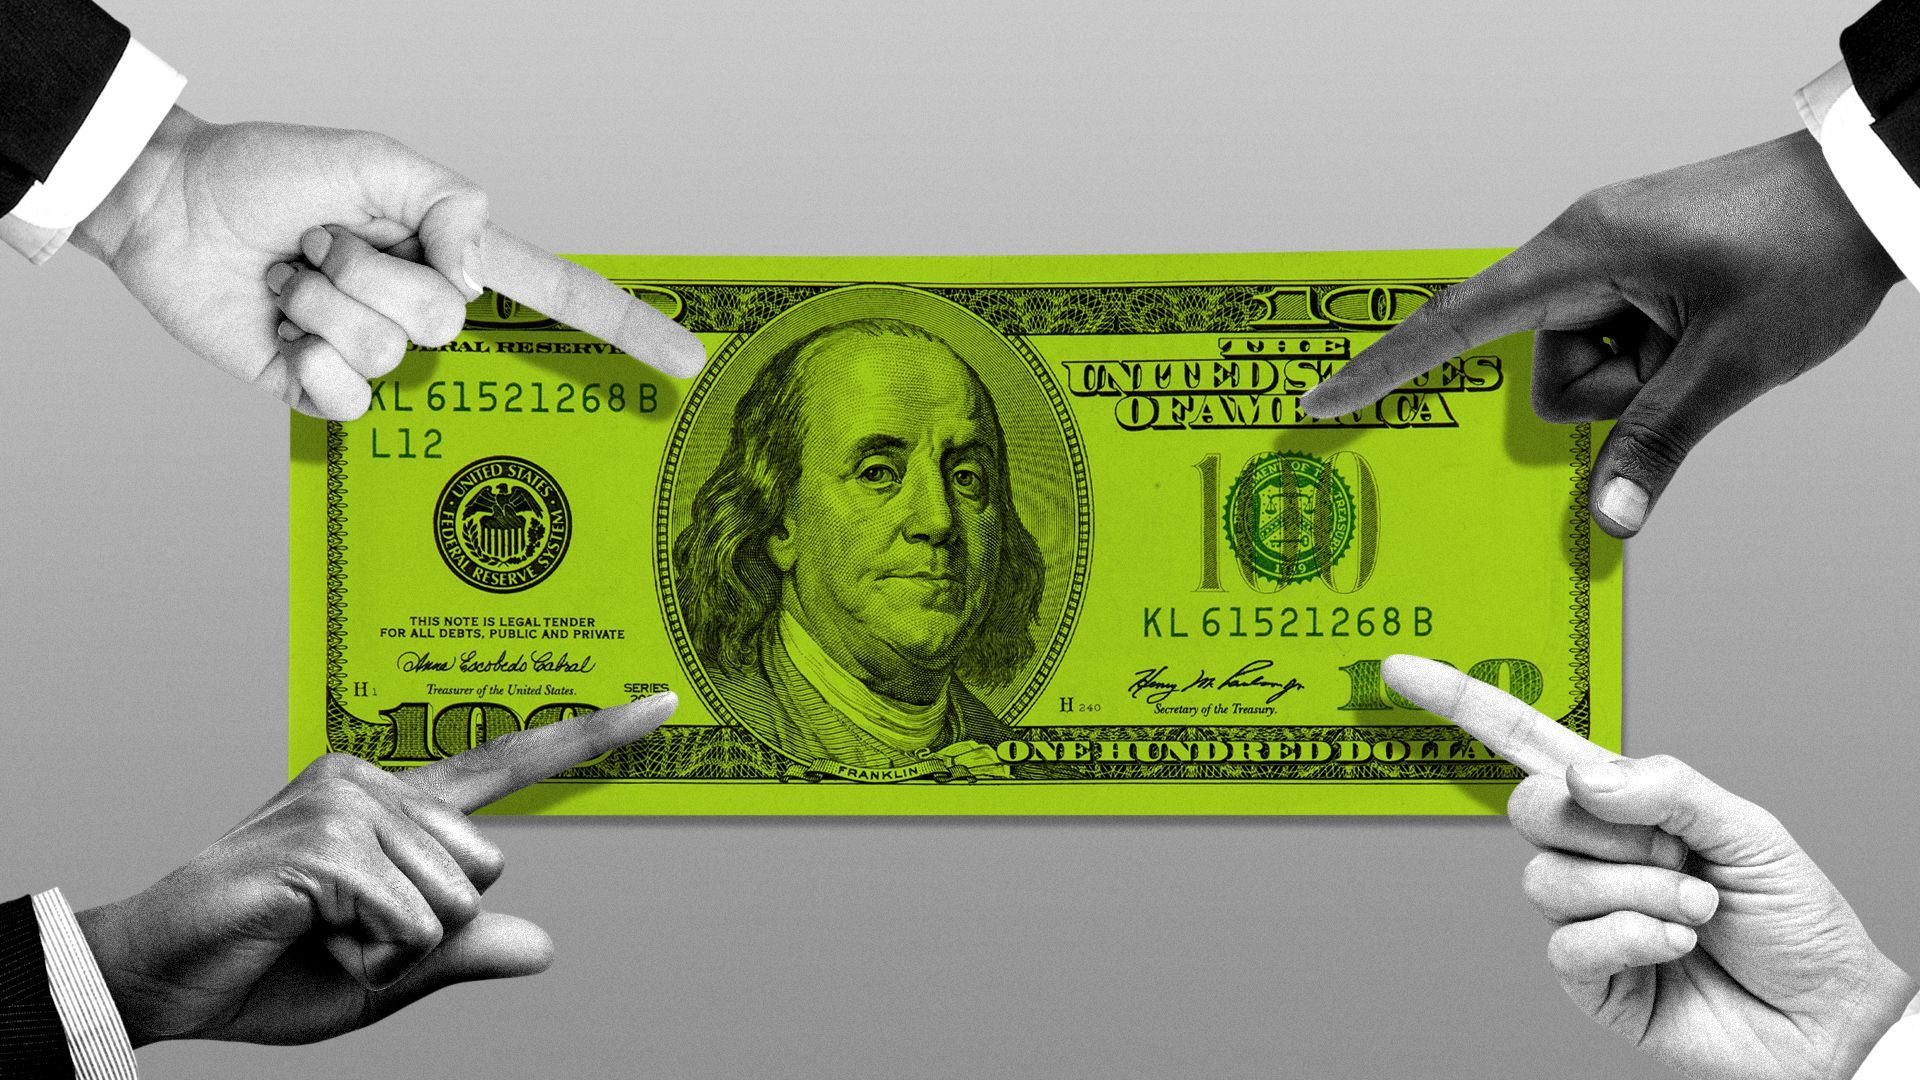 Illustration of fingers pointing towards a $100 bill